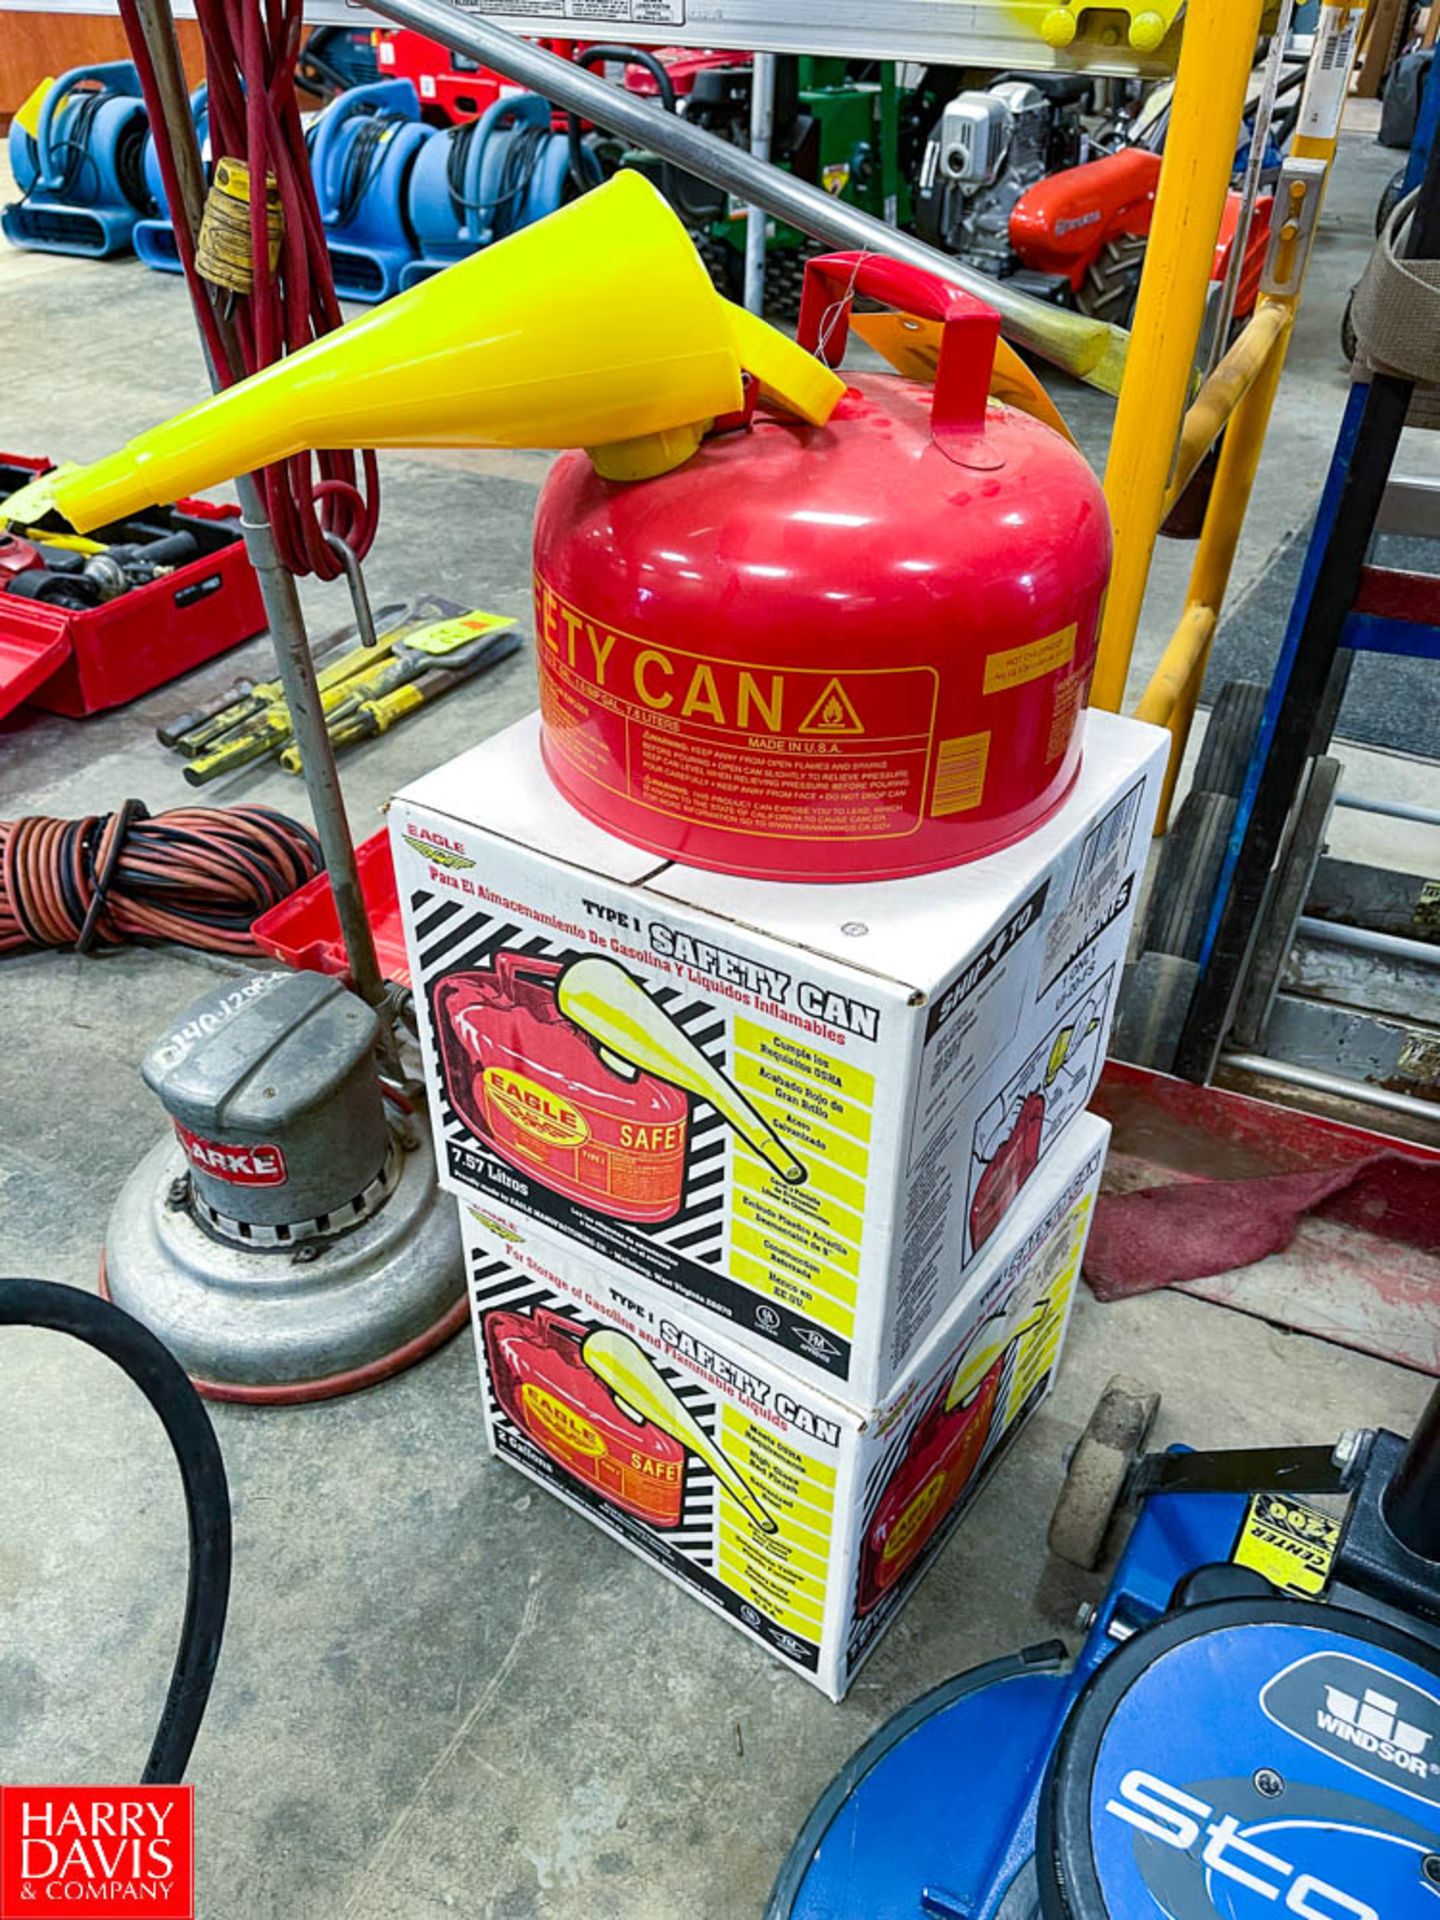 New Eagle 2 Gallon Gas Cans - Image 2 of 2